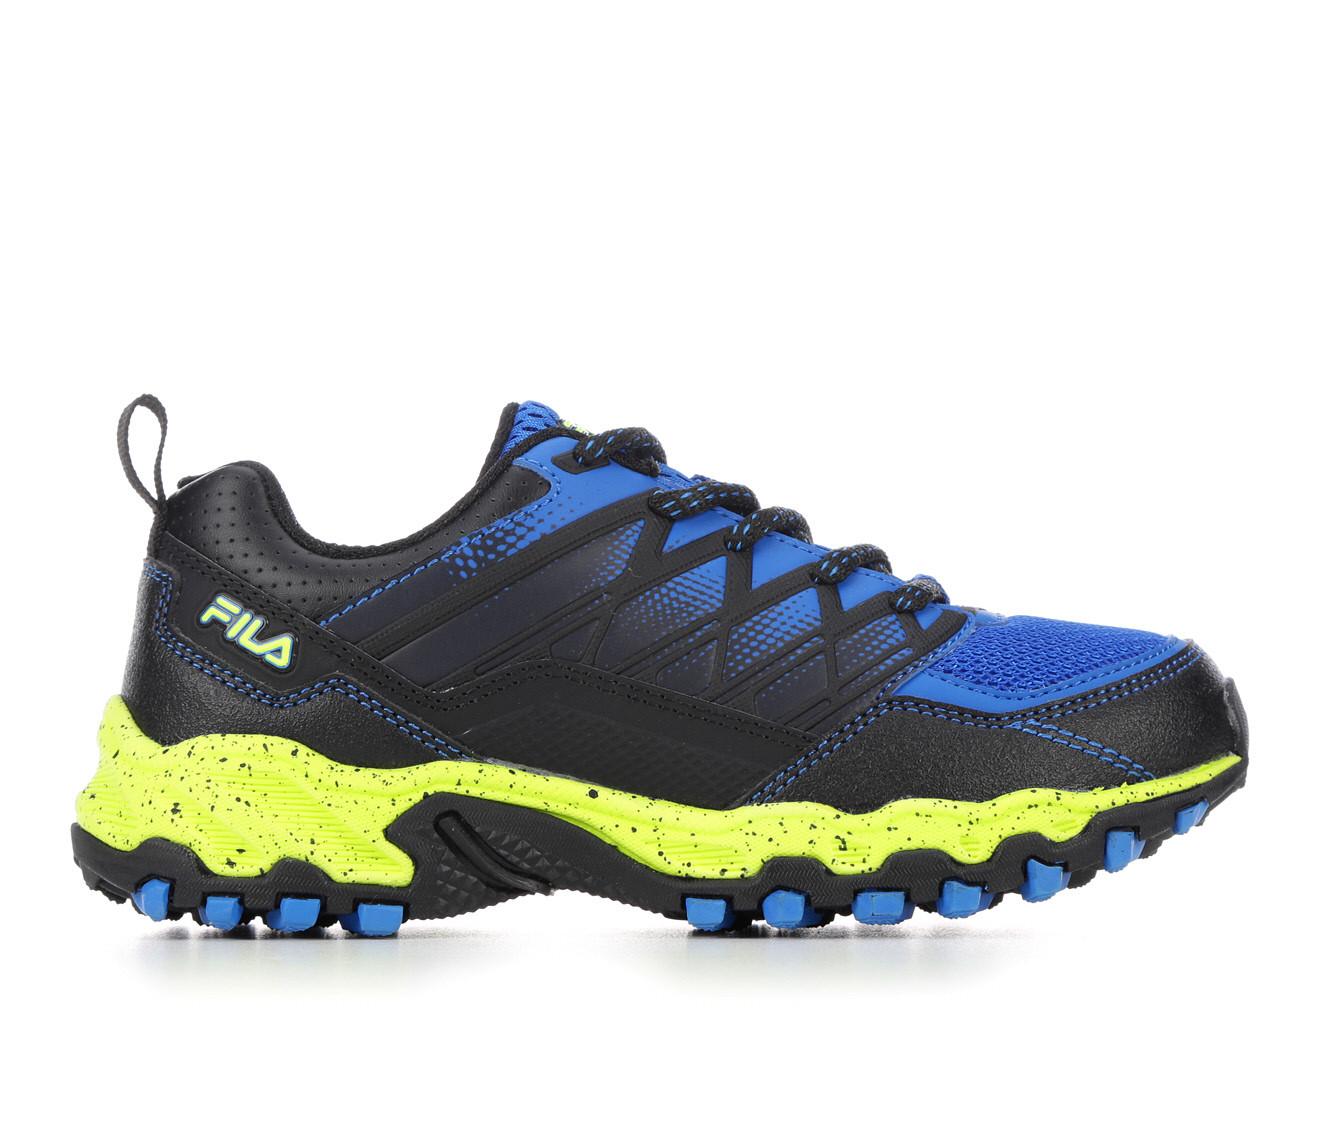 FILA Shoes, Sneakers, Kids\' Gym Shoes & Accessories | Shoe Carnival | Sneaker high